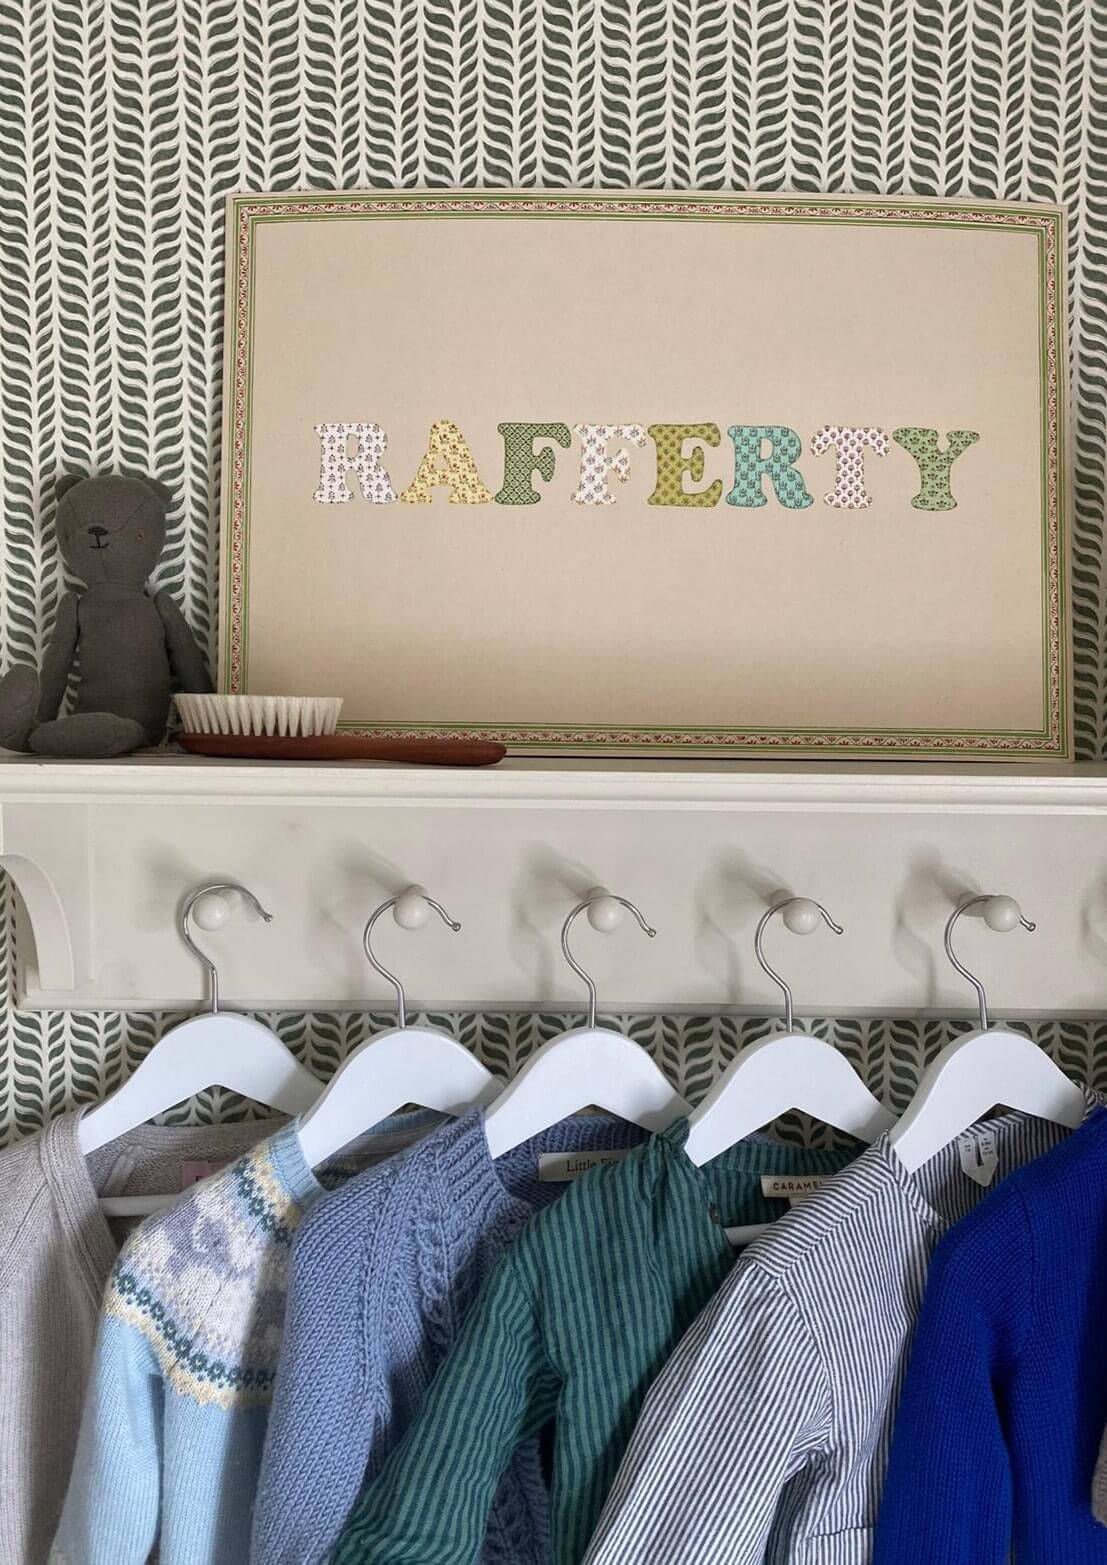 Bespoke name print that reads Rafferty, placed on top of a clothes hook with various children's knitwear on hangers